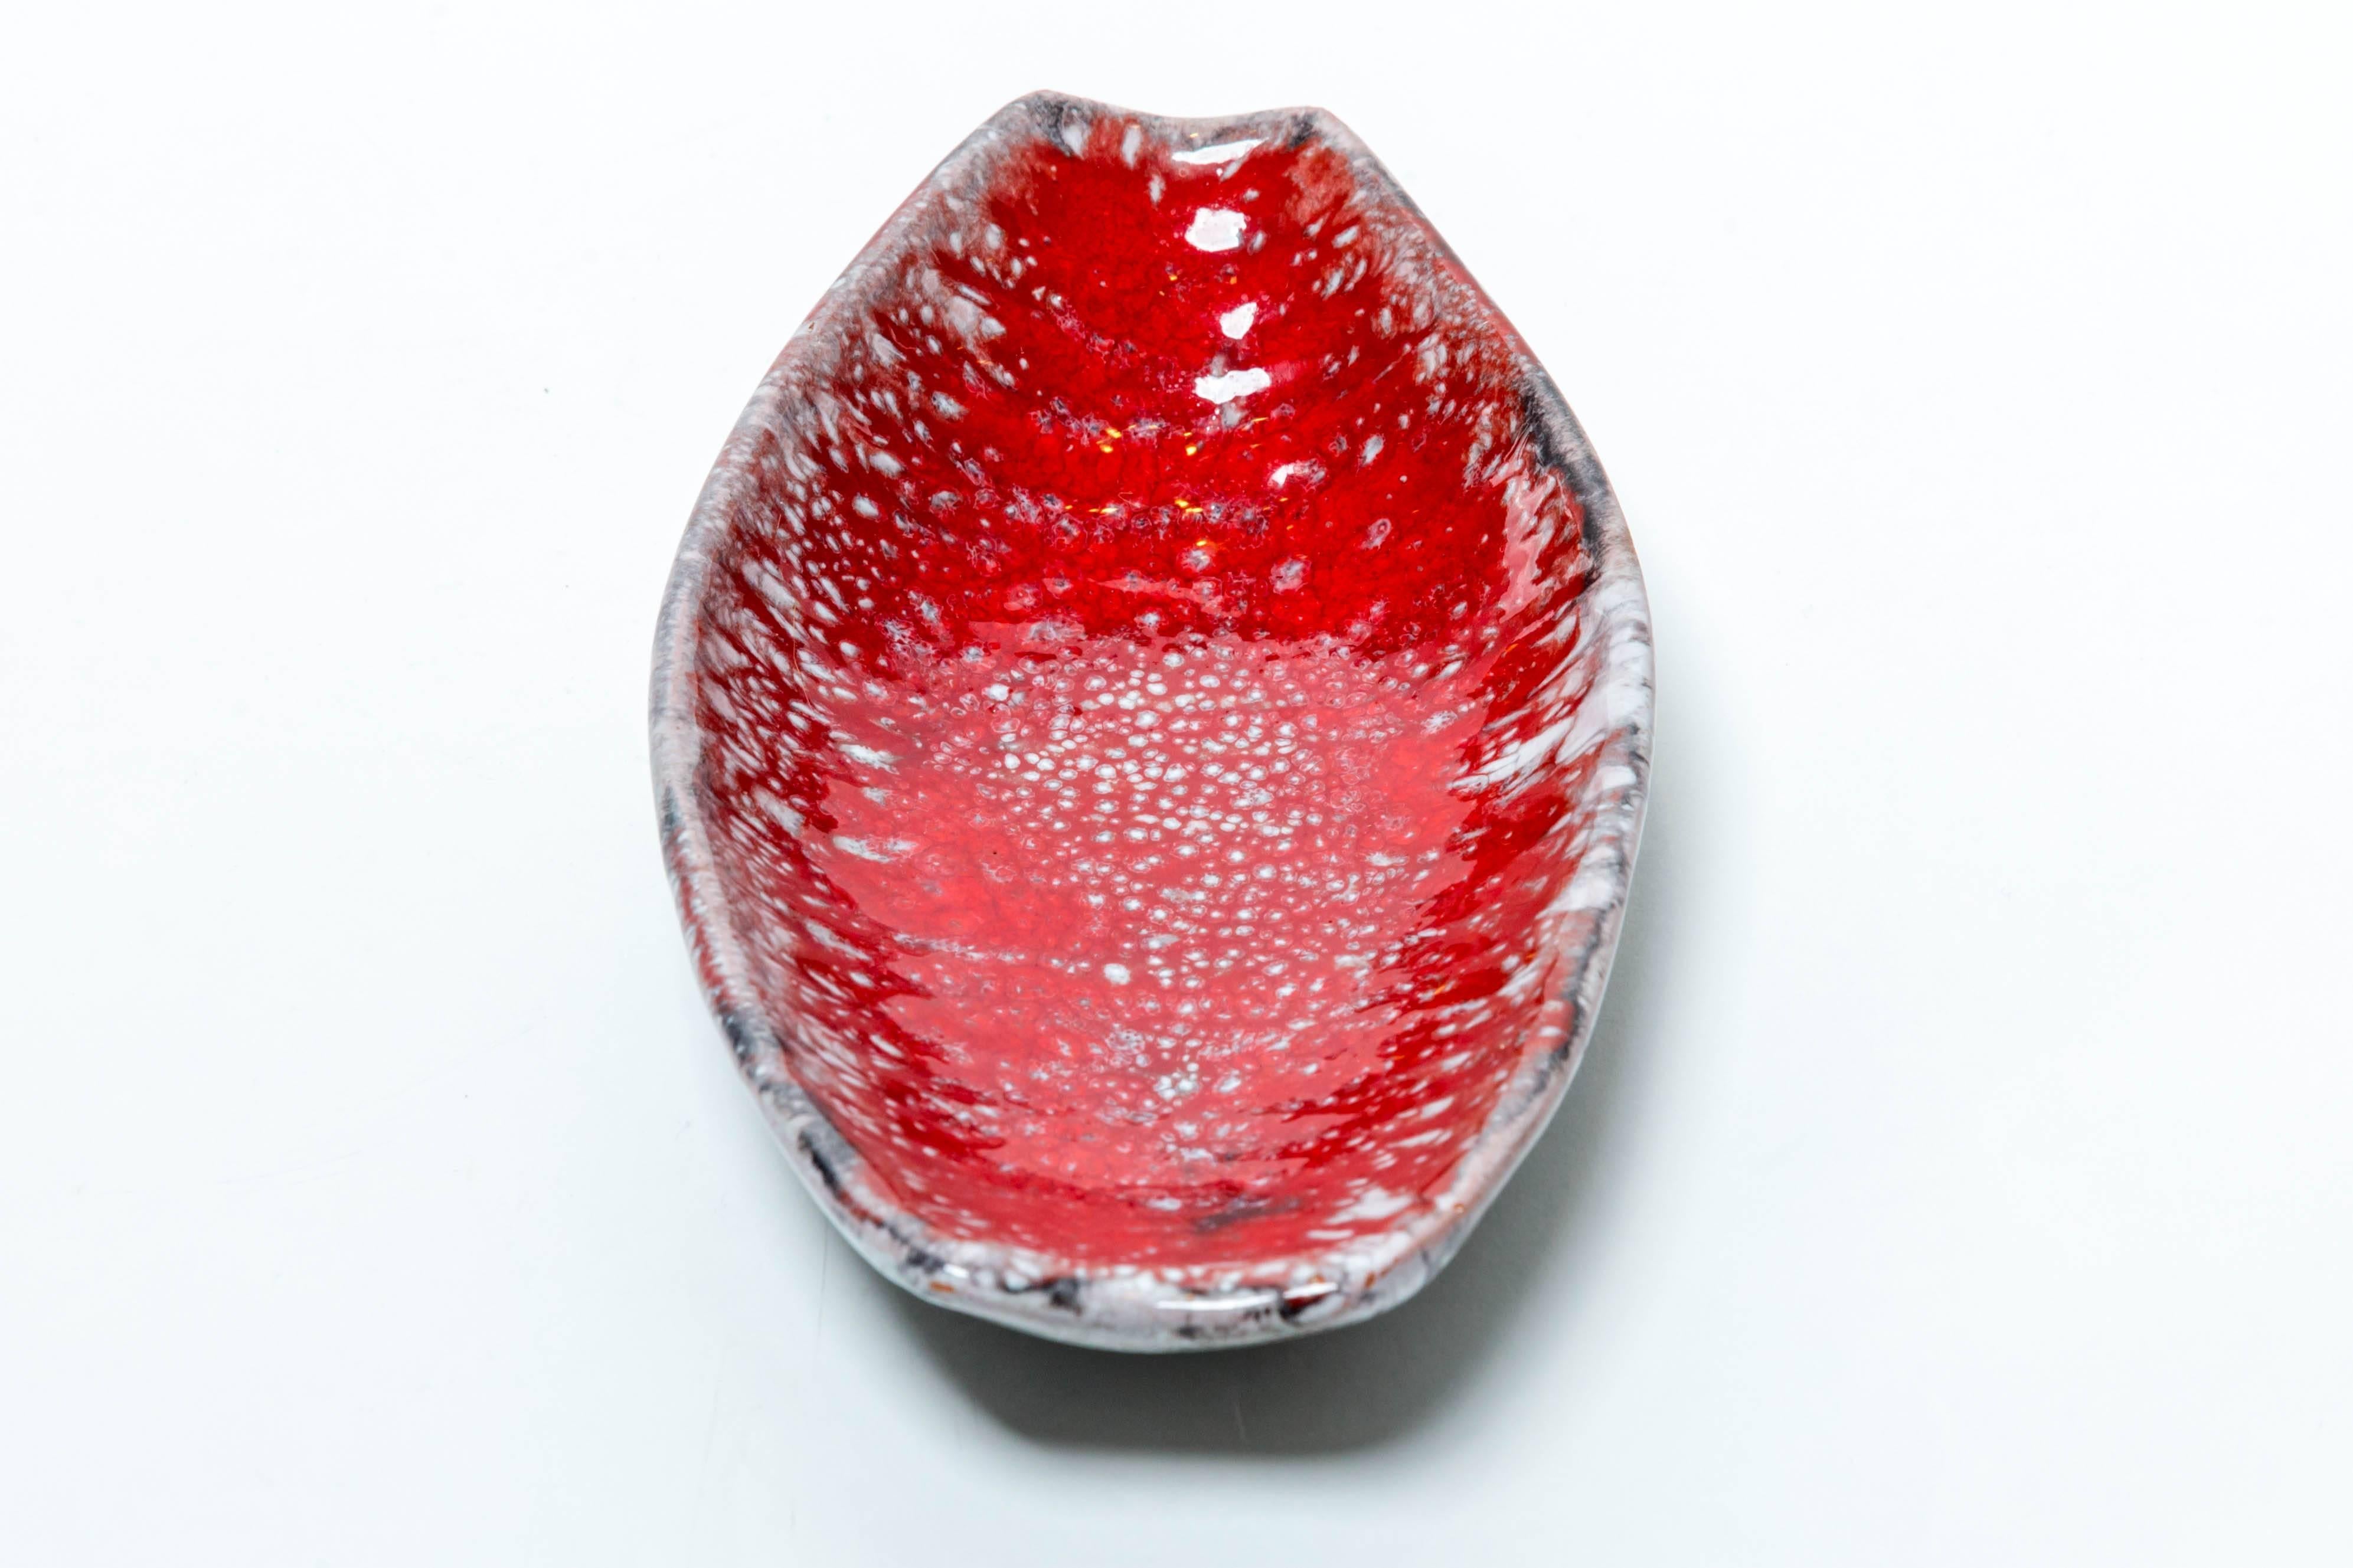 French Red Glazed Ceramic Dish by Arlette Roux Juan